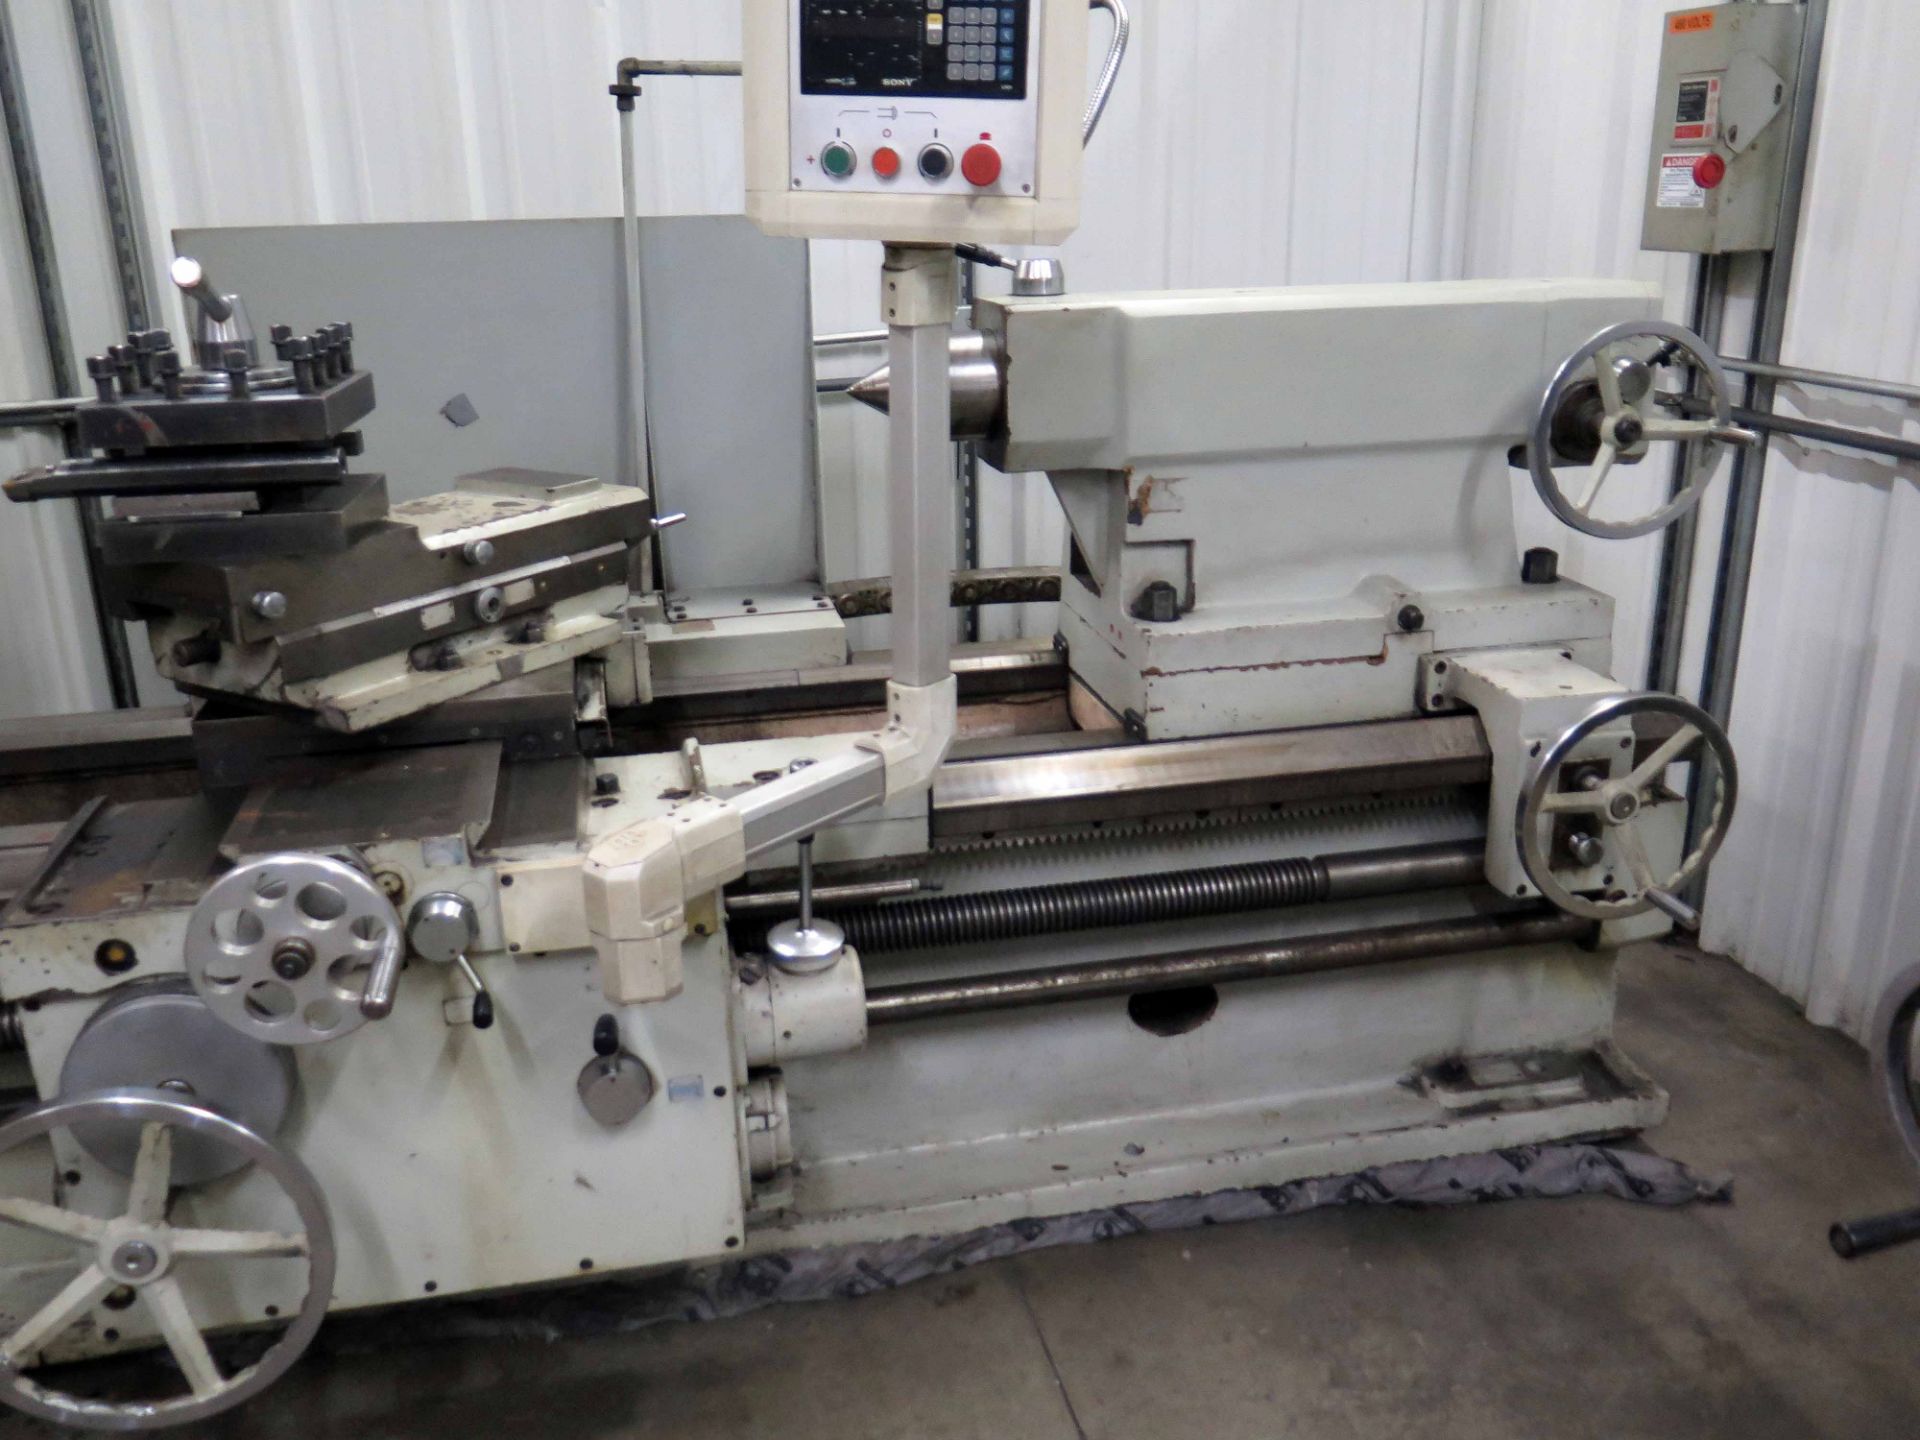 ENGINE LATHE, VANGUARD 40" X 78" MDL. CW61, Sony 2-axis D.R.O., 39-1/2" dia. 4-jaw chuck, spds: 4- - Image 3 of 3